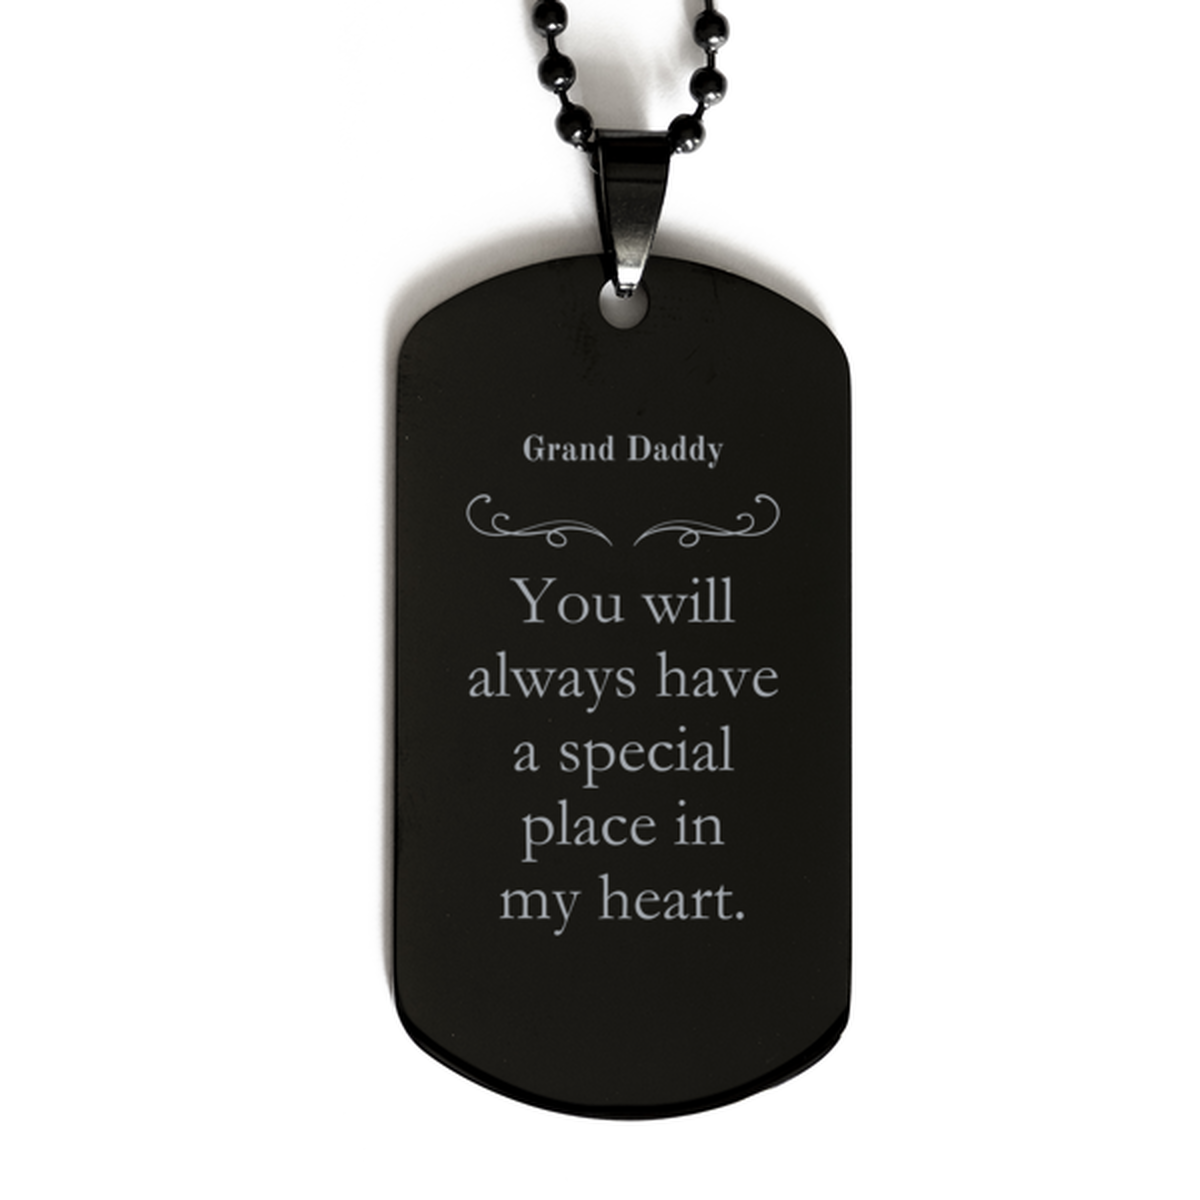 Grand Daddy Black Dog Tag You Will Always Have a Special Place in My Heart Engraved Gift for Veterans Day and Birthday